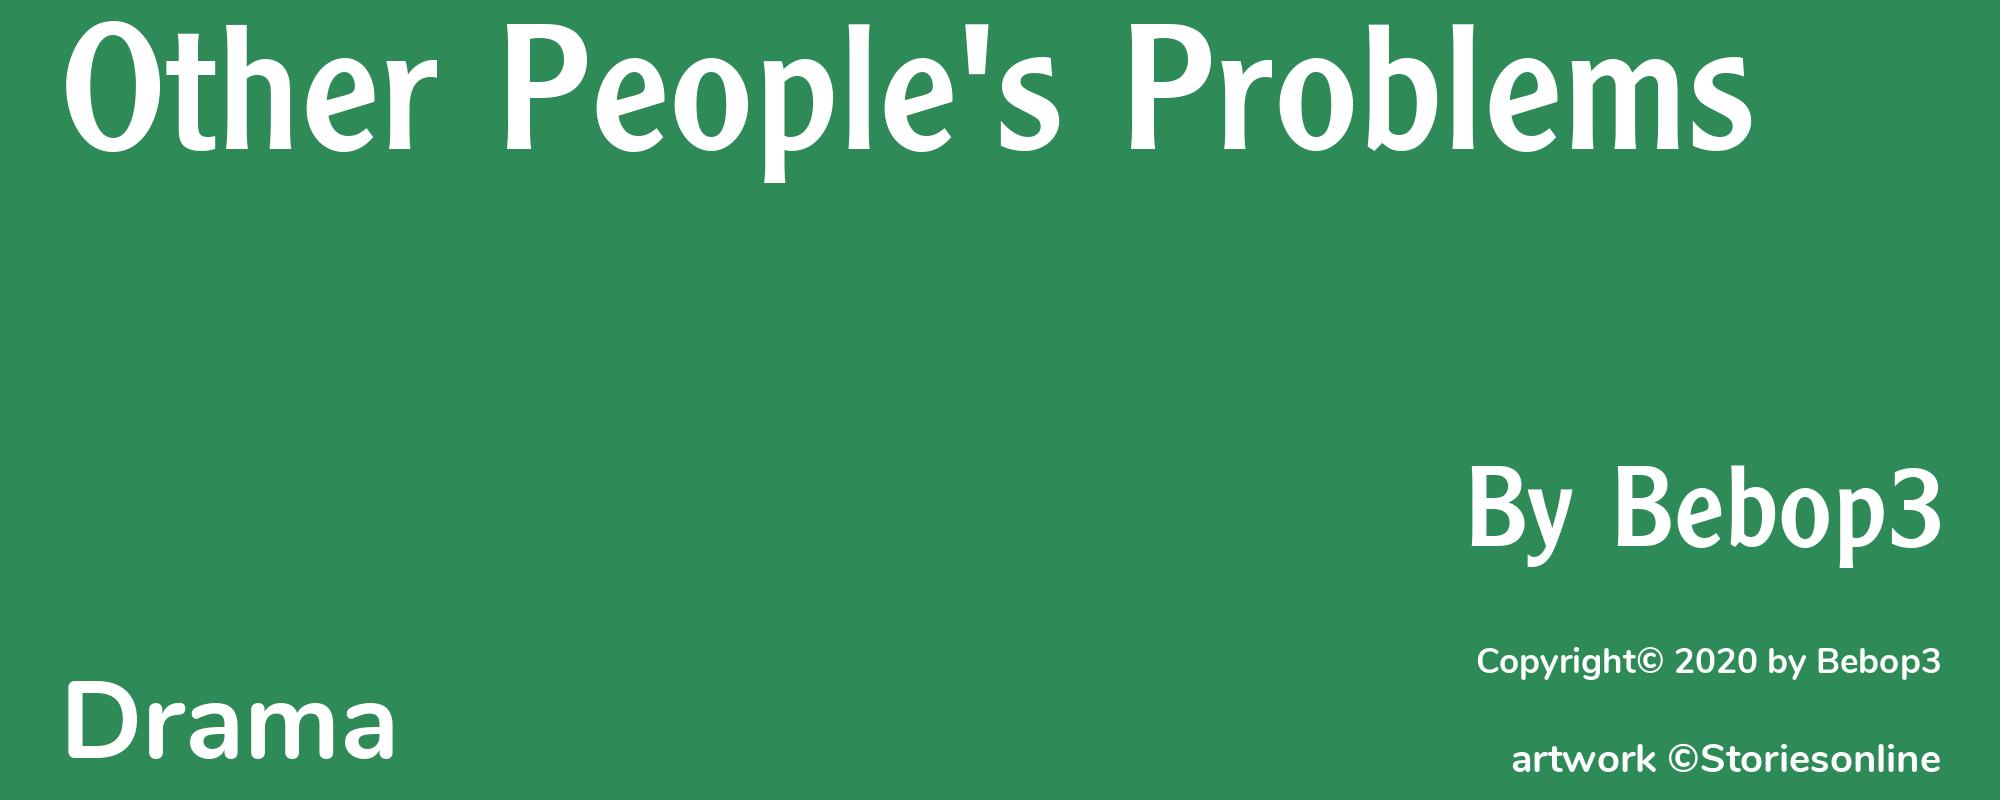 Other People's Problems - Cover